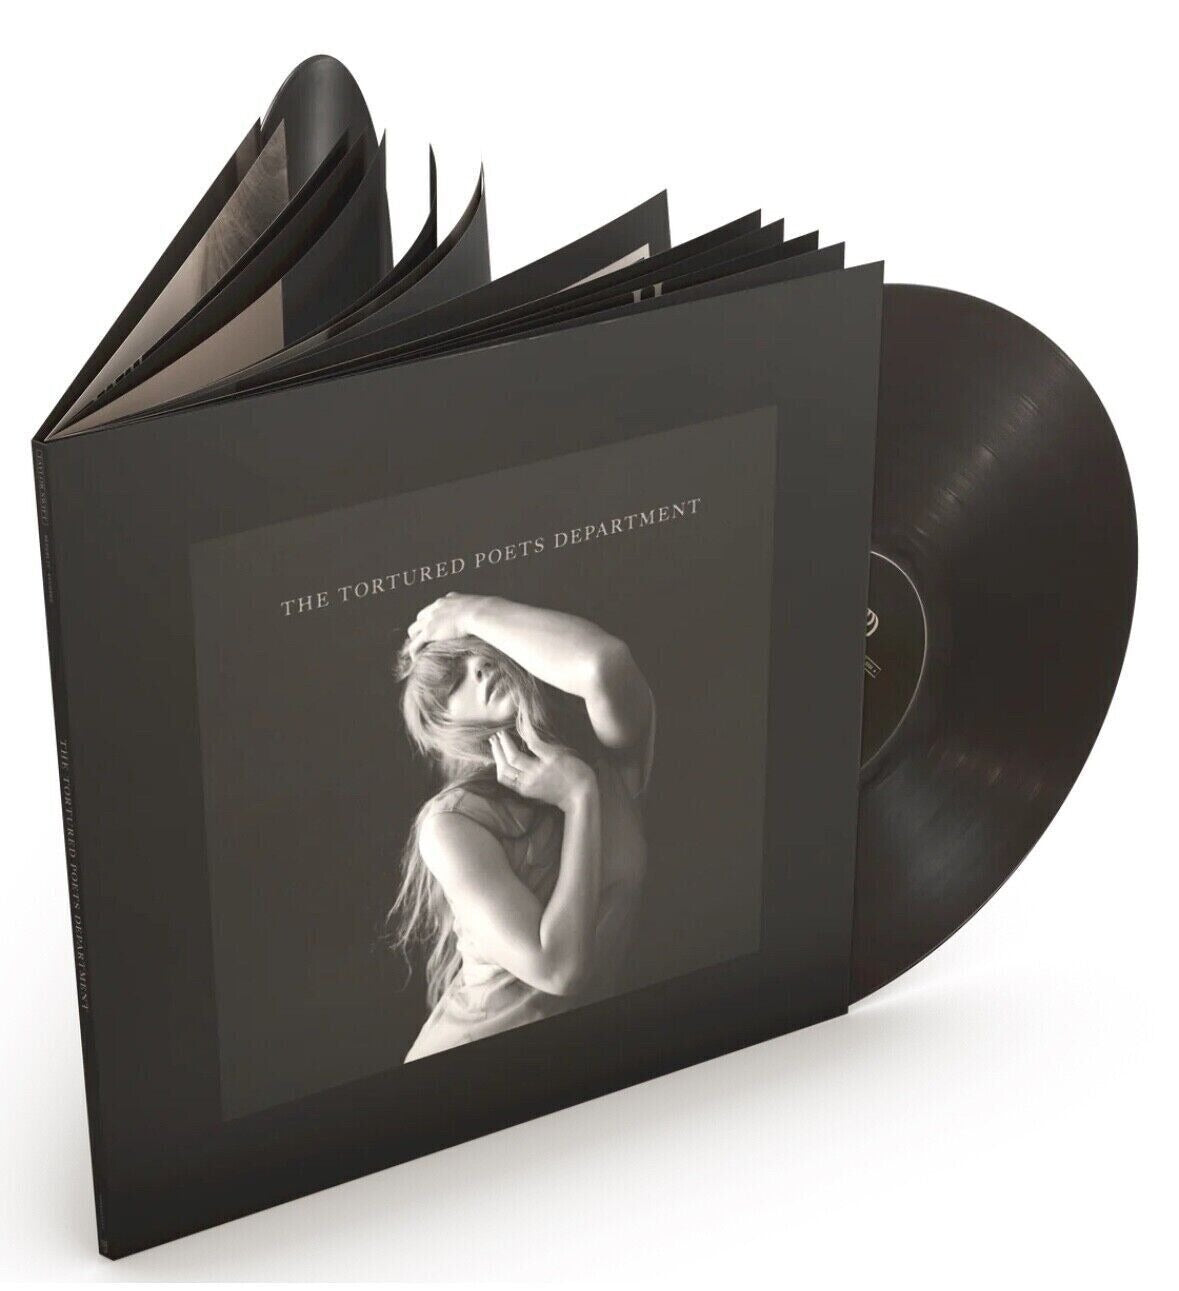 Taylor Swift - The Tortured Poets Department (Indie Exclusive, Limited Charcoal Colored Vinyl) 2LP